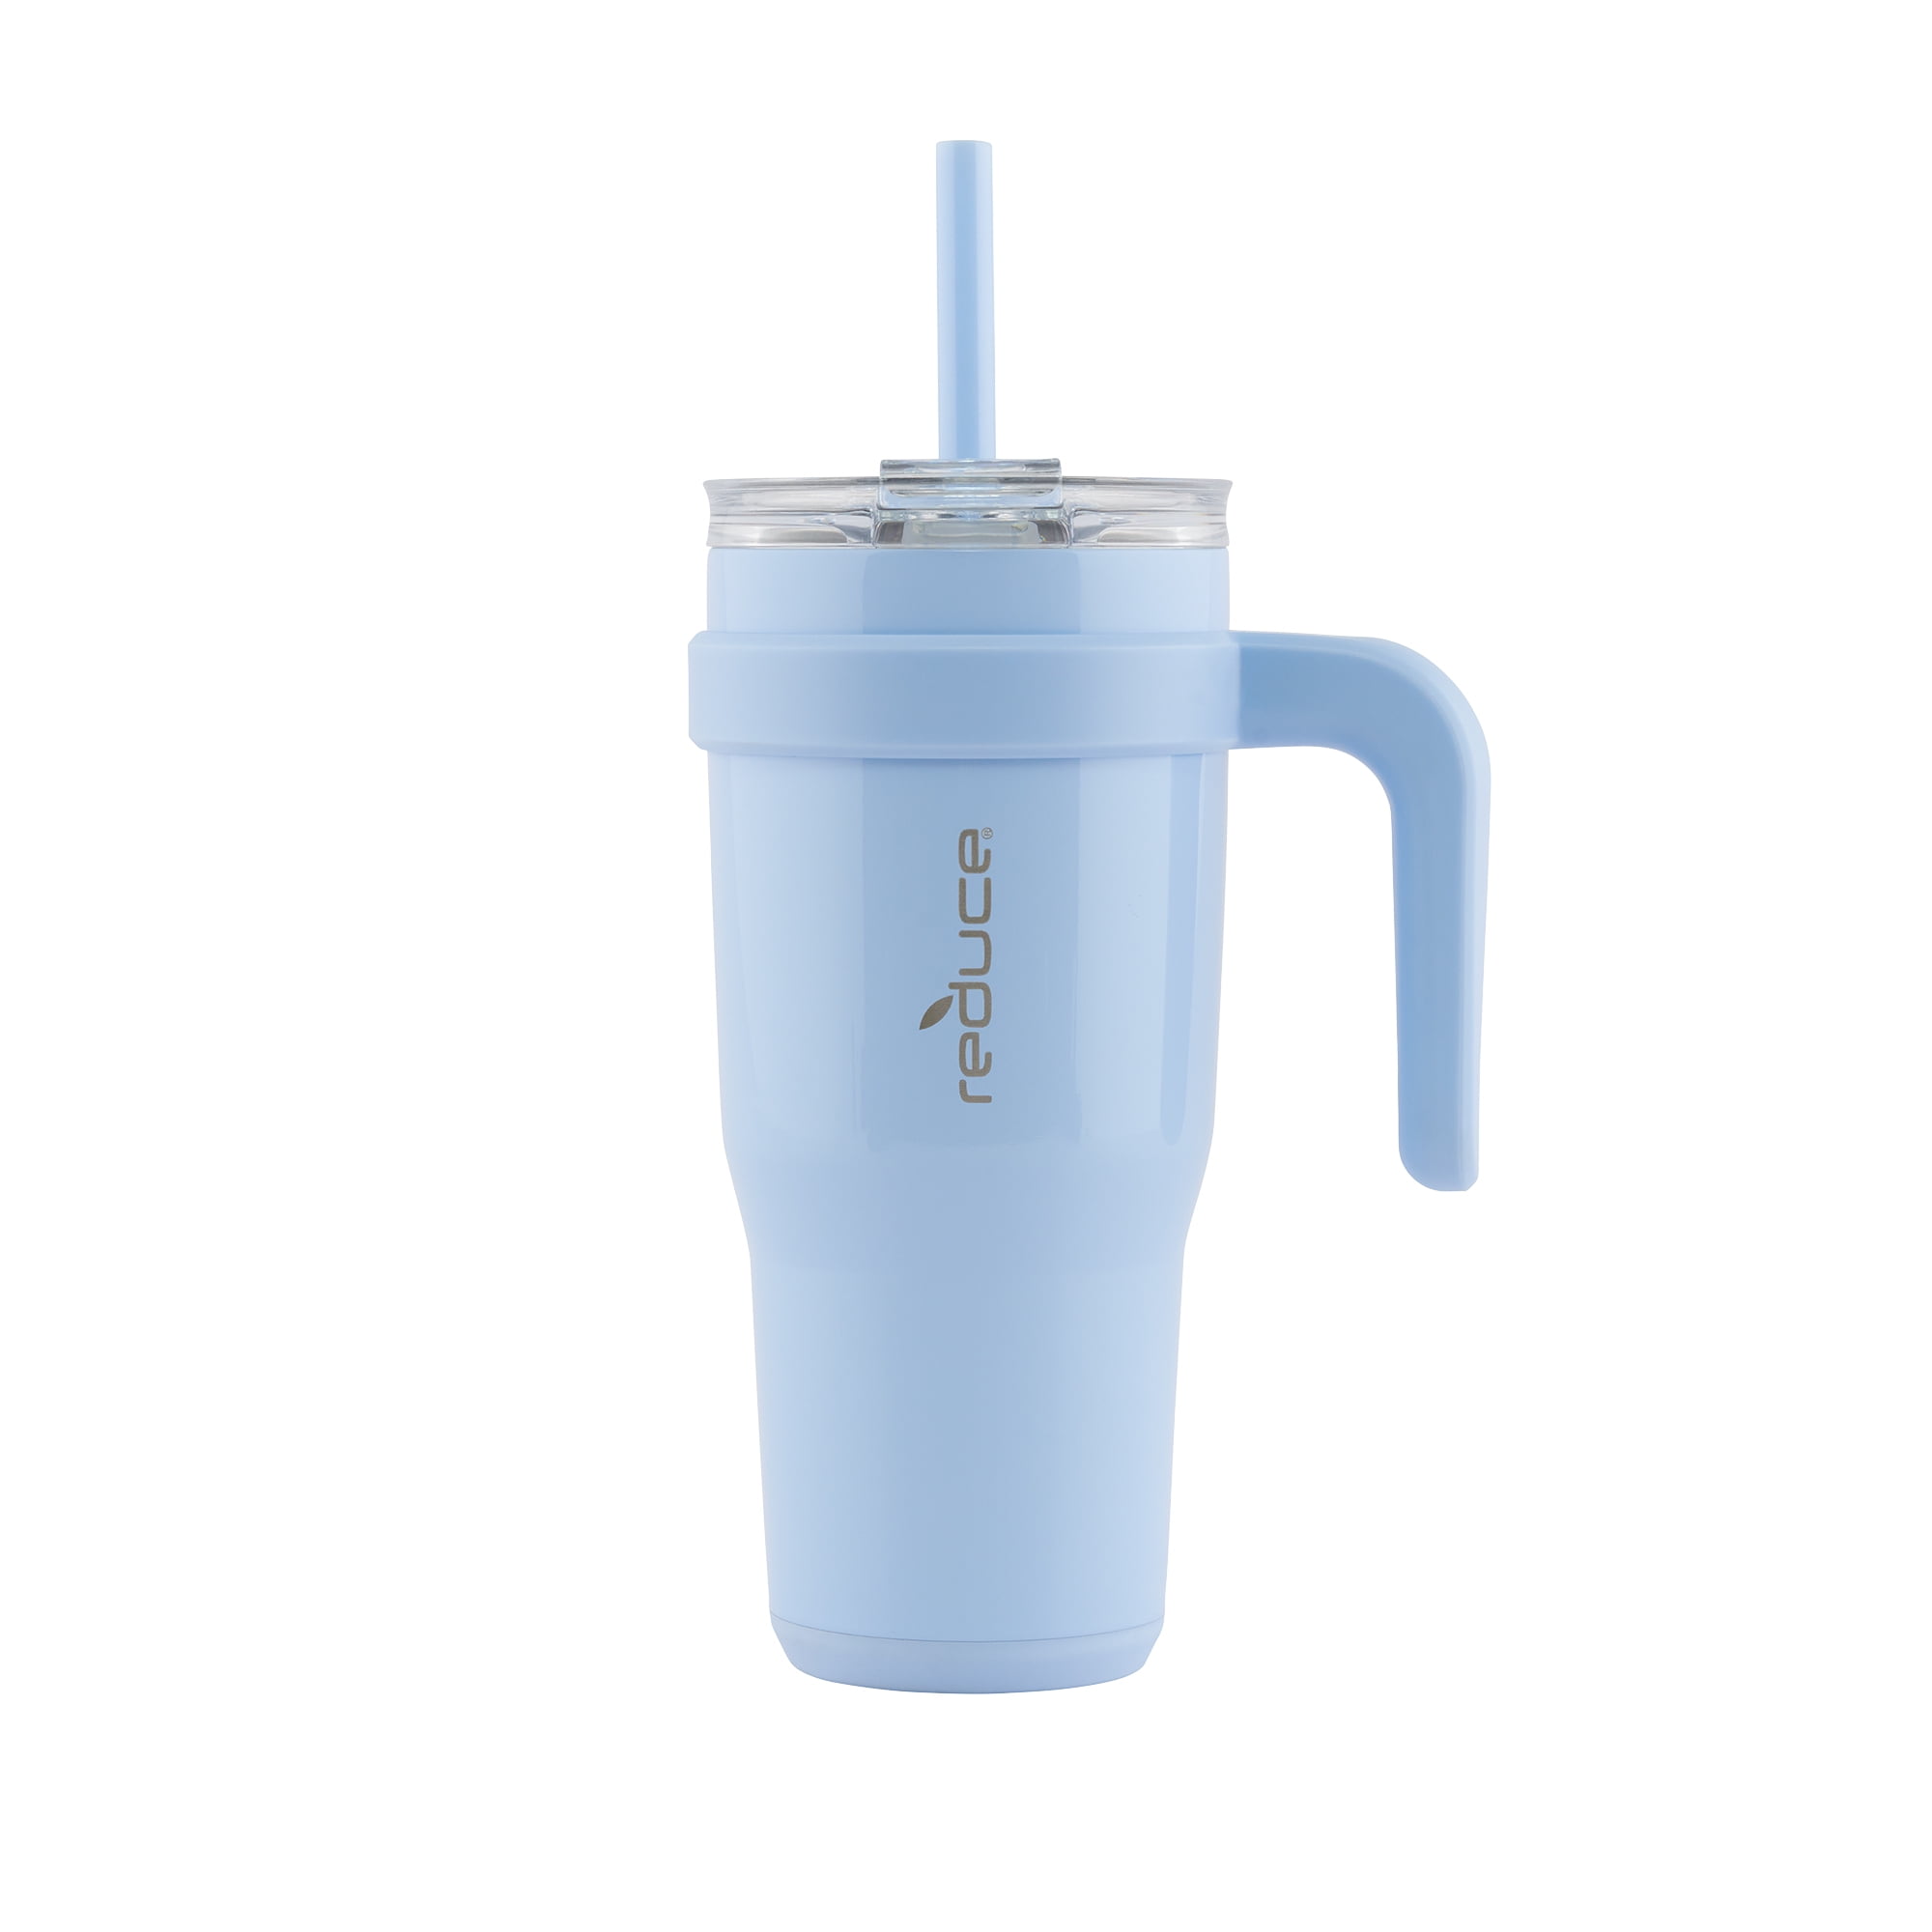 BLUEPOLAR 13oz/400ml Tumbler Water Glass, Water Bottle with Straw and Lid  Sealed Carry on, Glass Cof…See more BLUEPOLAR 13oz/400ml Tumbler Water